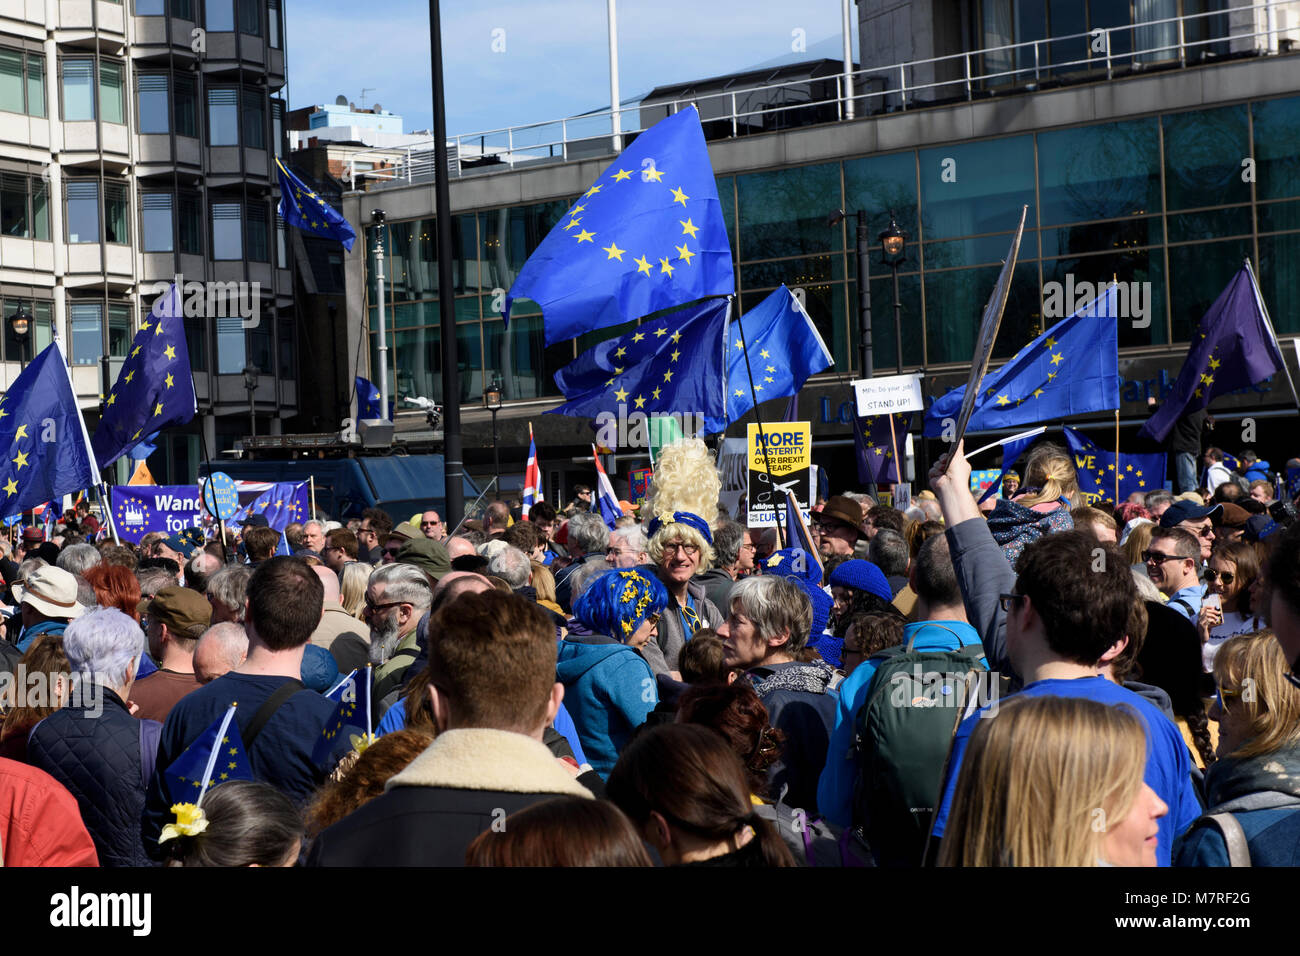 A crowd of EU supporters holding anti-Brexit placards and waving EU flags during the Unite for Europe march - anti-Brexit protest in London, UK. Stock Photo